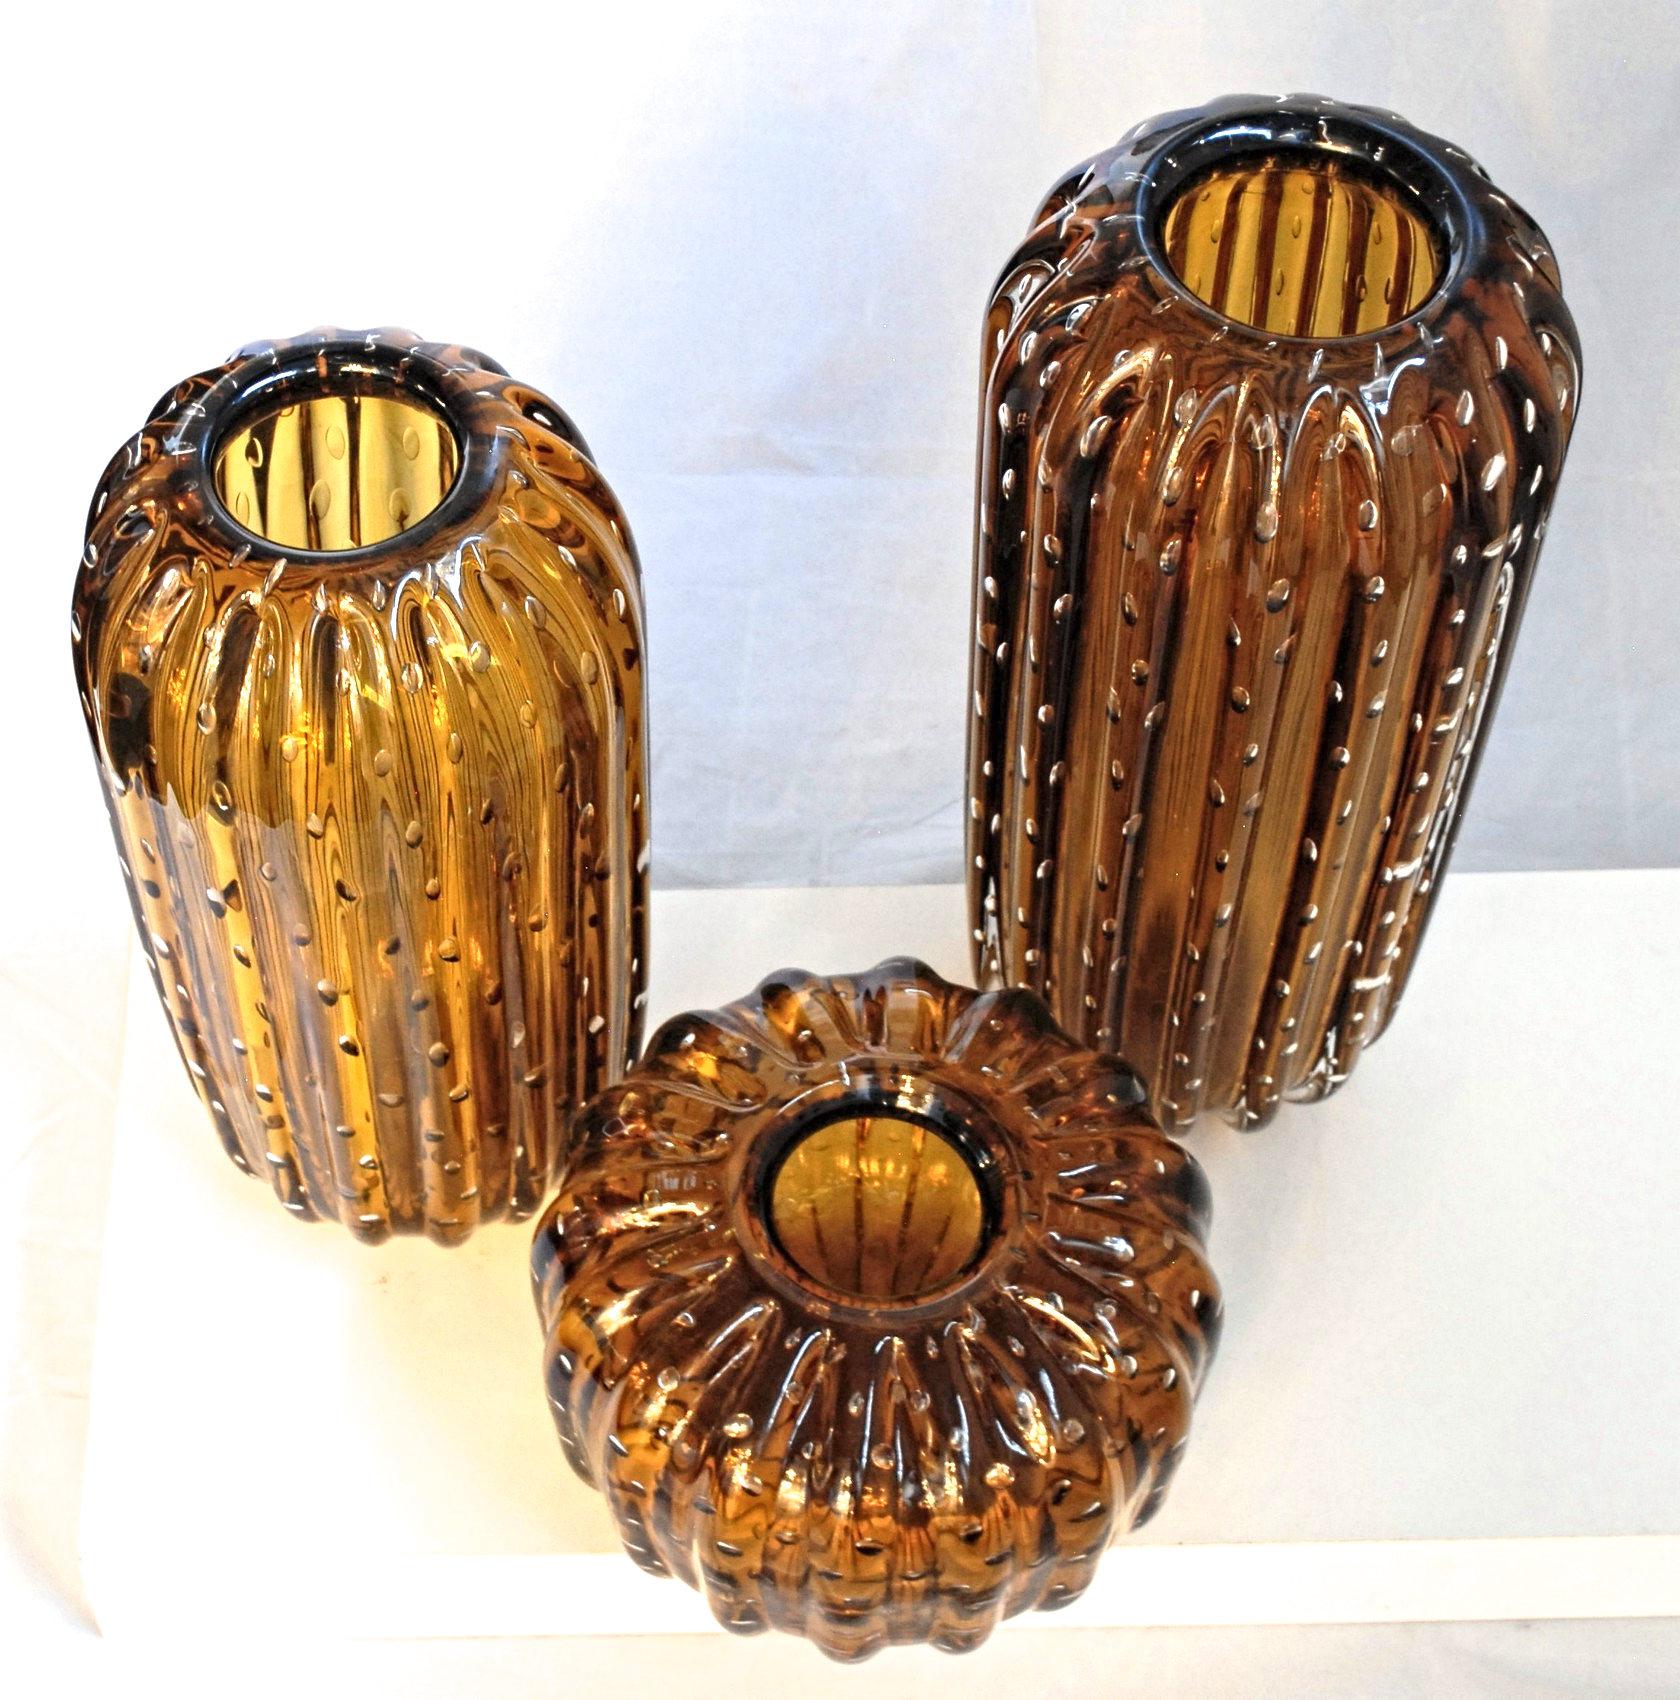 A splendid group of three vases made combining the regarding straight technique and the baloton. Shape is cylindrical and resembles the Saguaro cactus.

Deep amber coated with clear. 

Shape, design and pattern leads to a Barovier 1950s